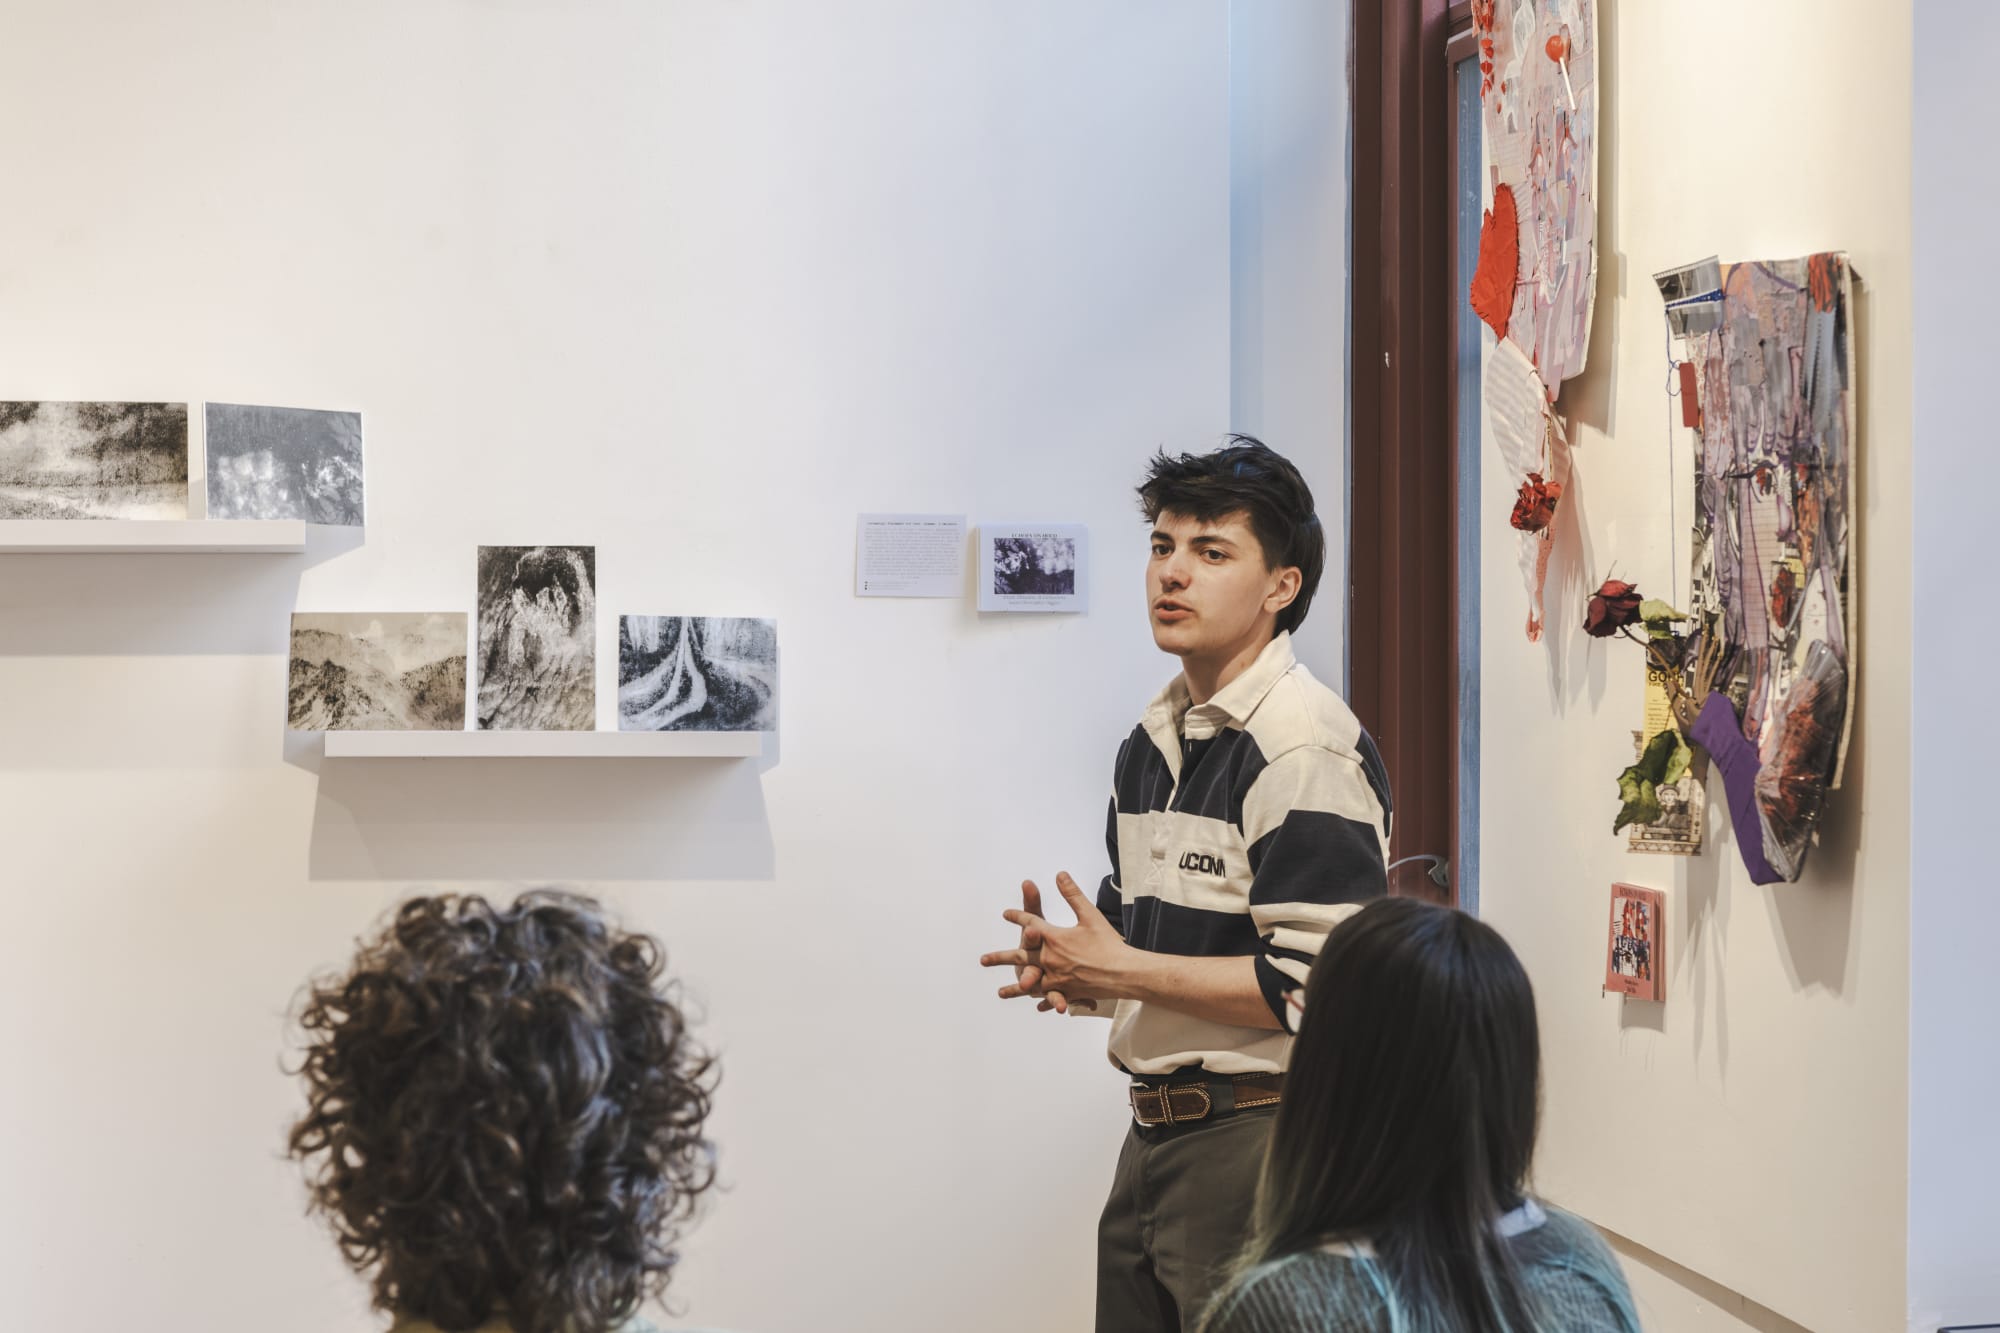 A student stands in front of a wall of artwork, presenting to a group of people